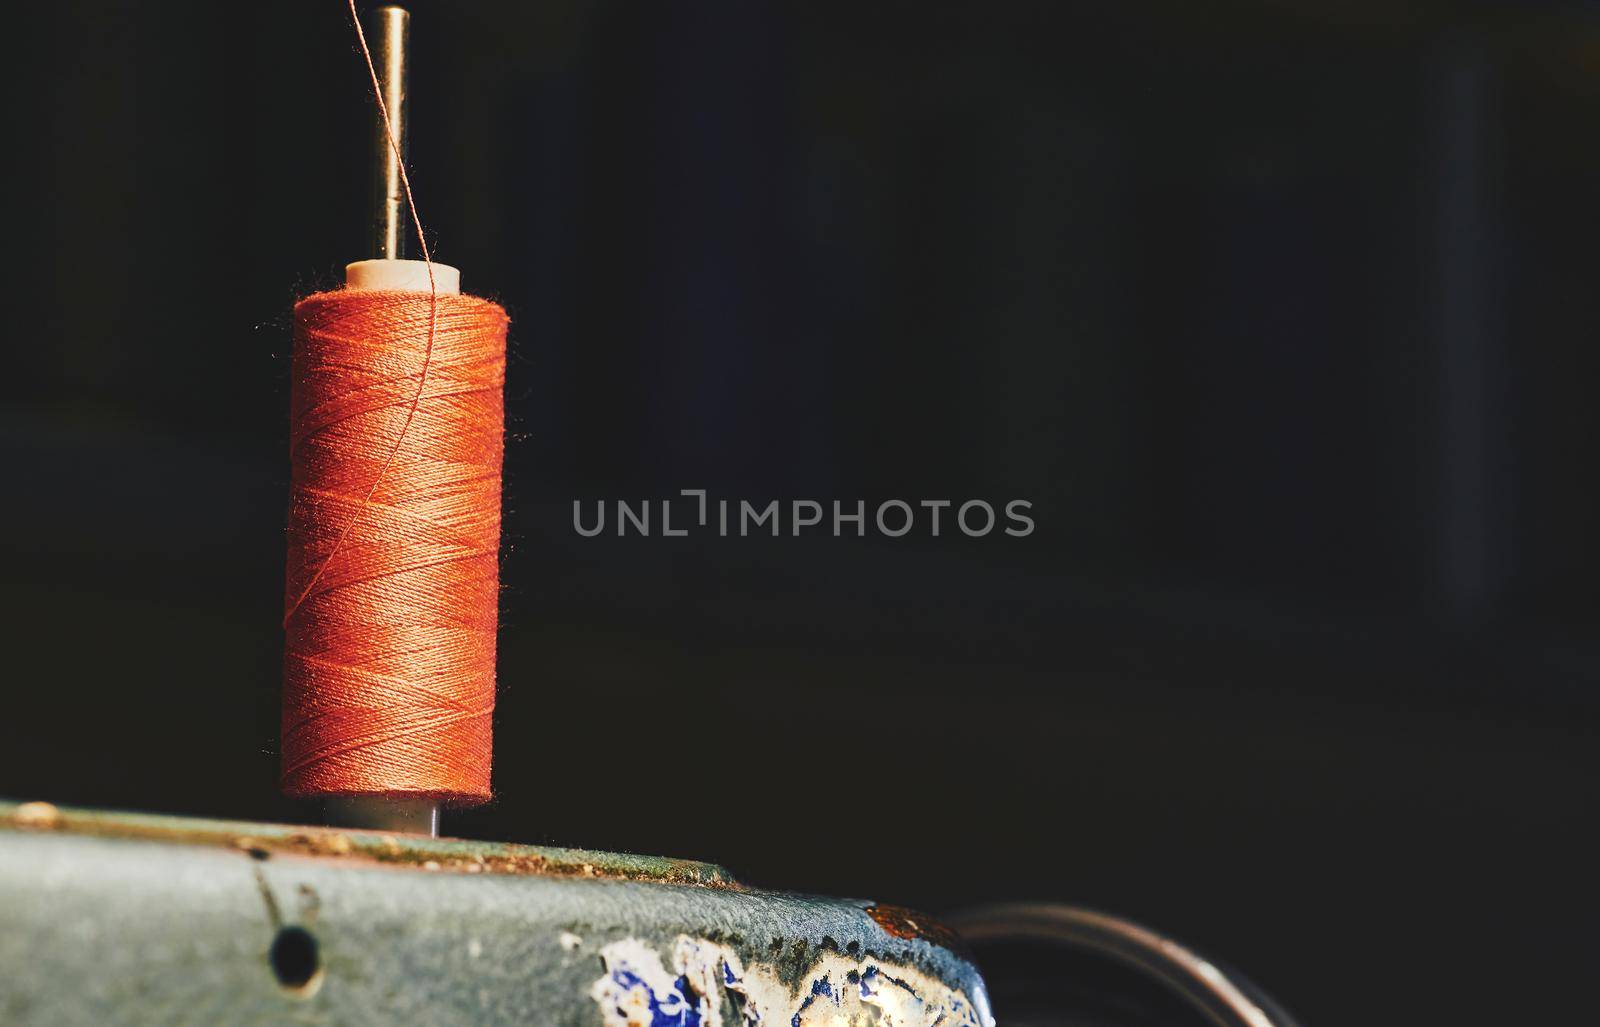 a long, thin strand of cotton, nylon, or other fibers used in sewing or weaving. Orange spool of thread on an old gray sewing machine and a dark background.